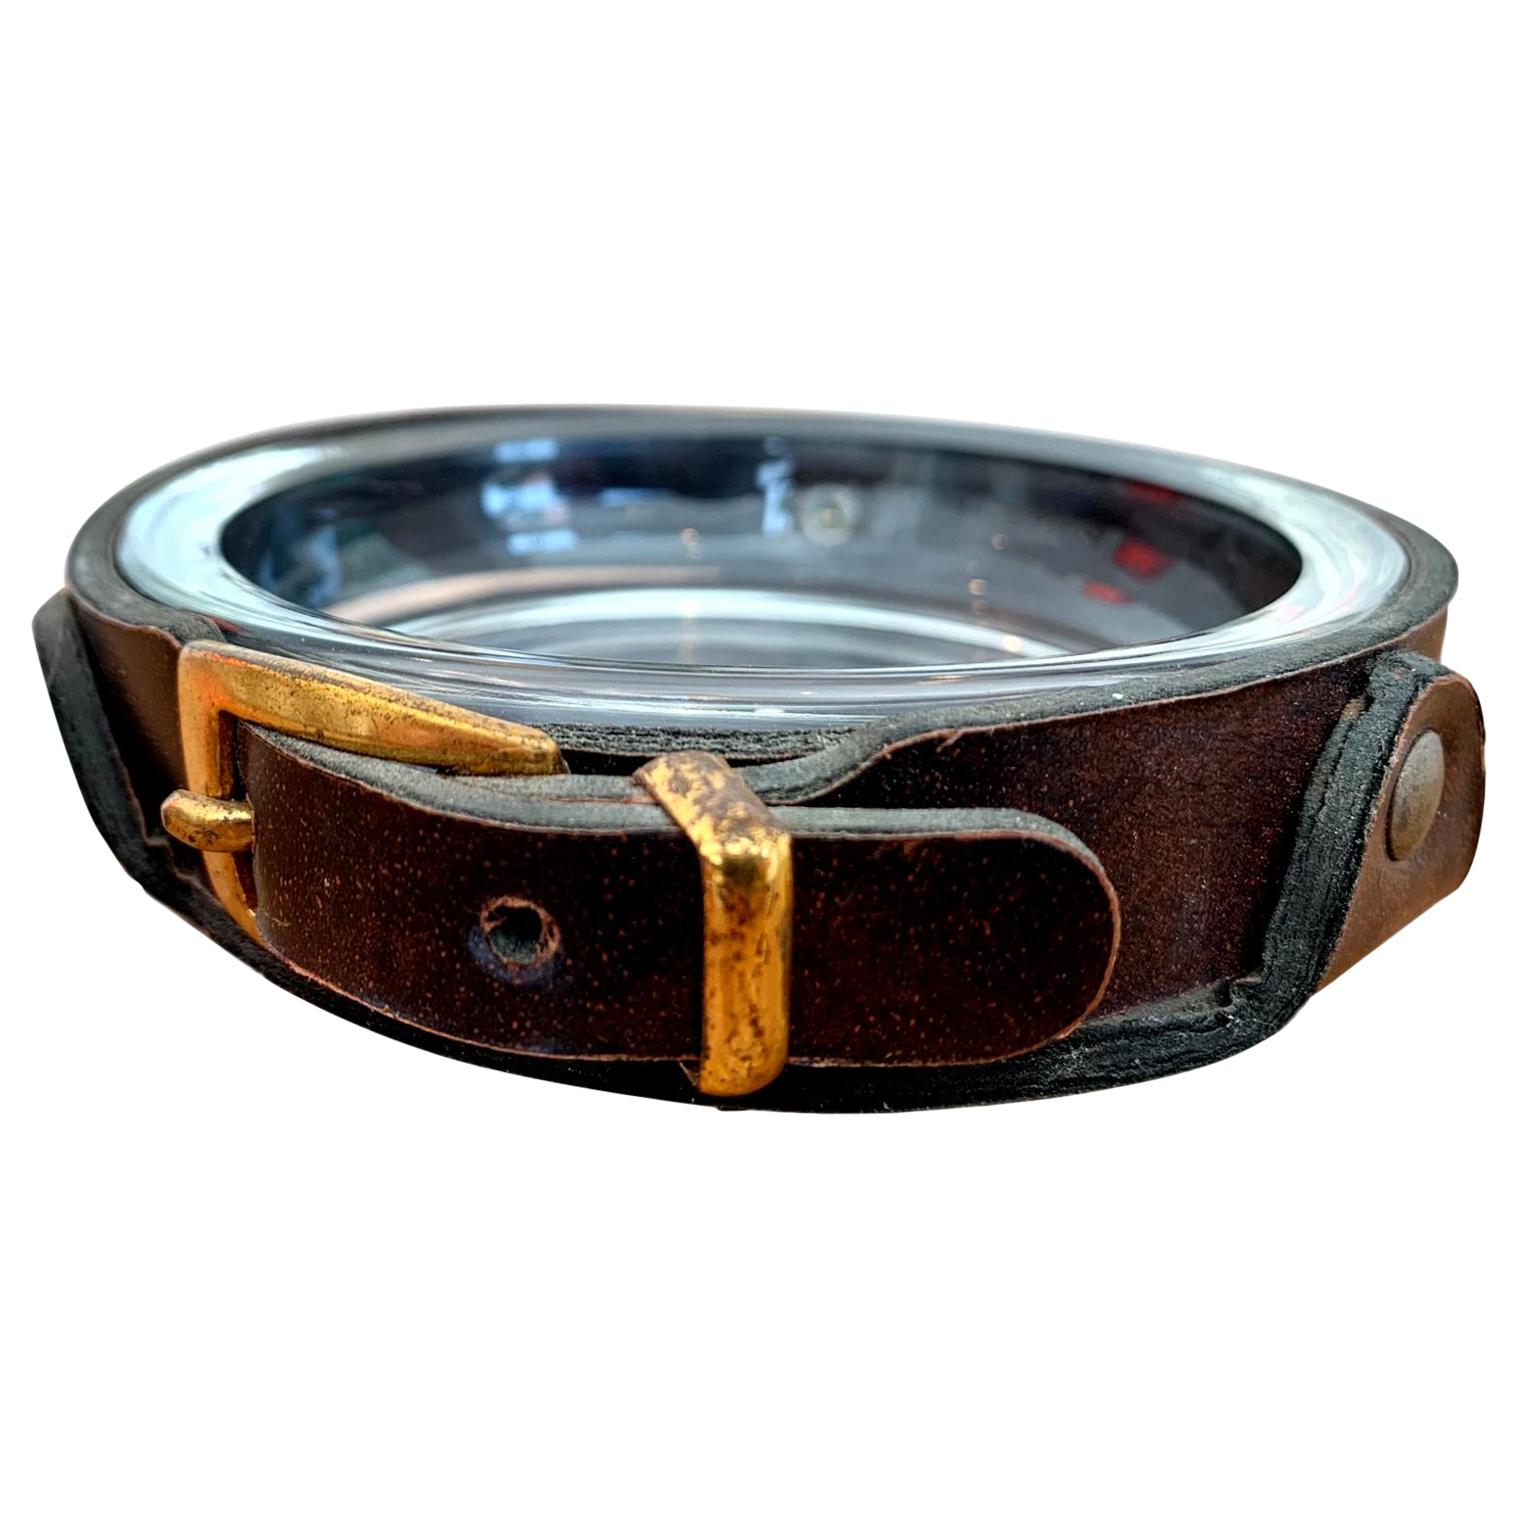 Adnet Style Leather and Glass Ashtray / Catchall